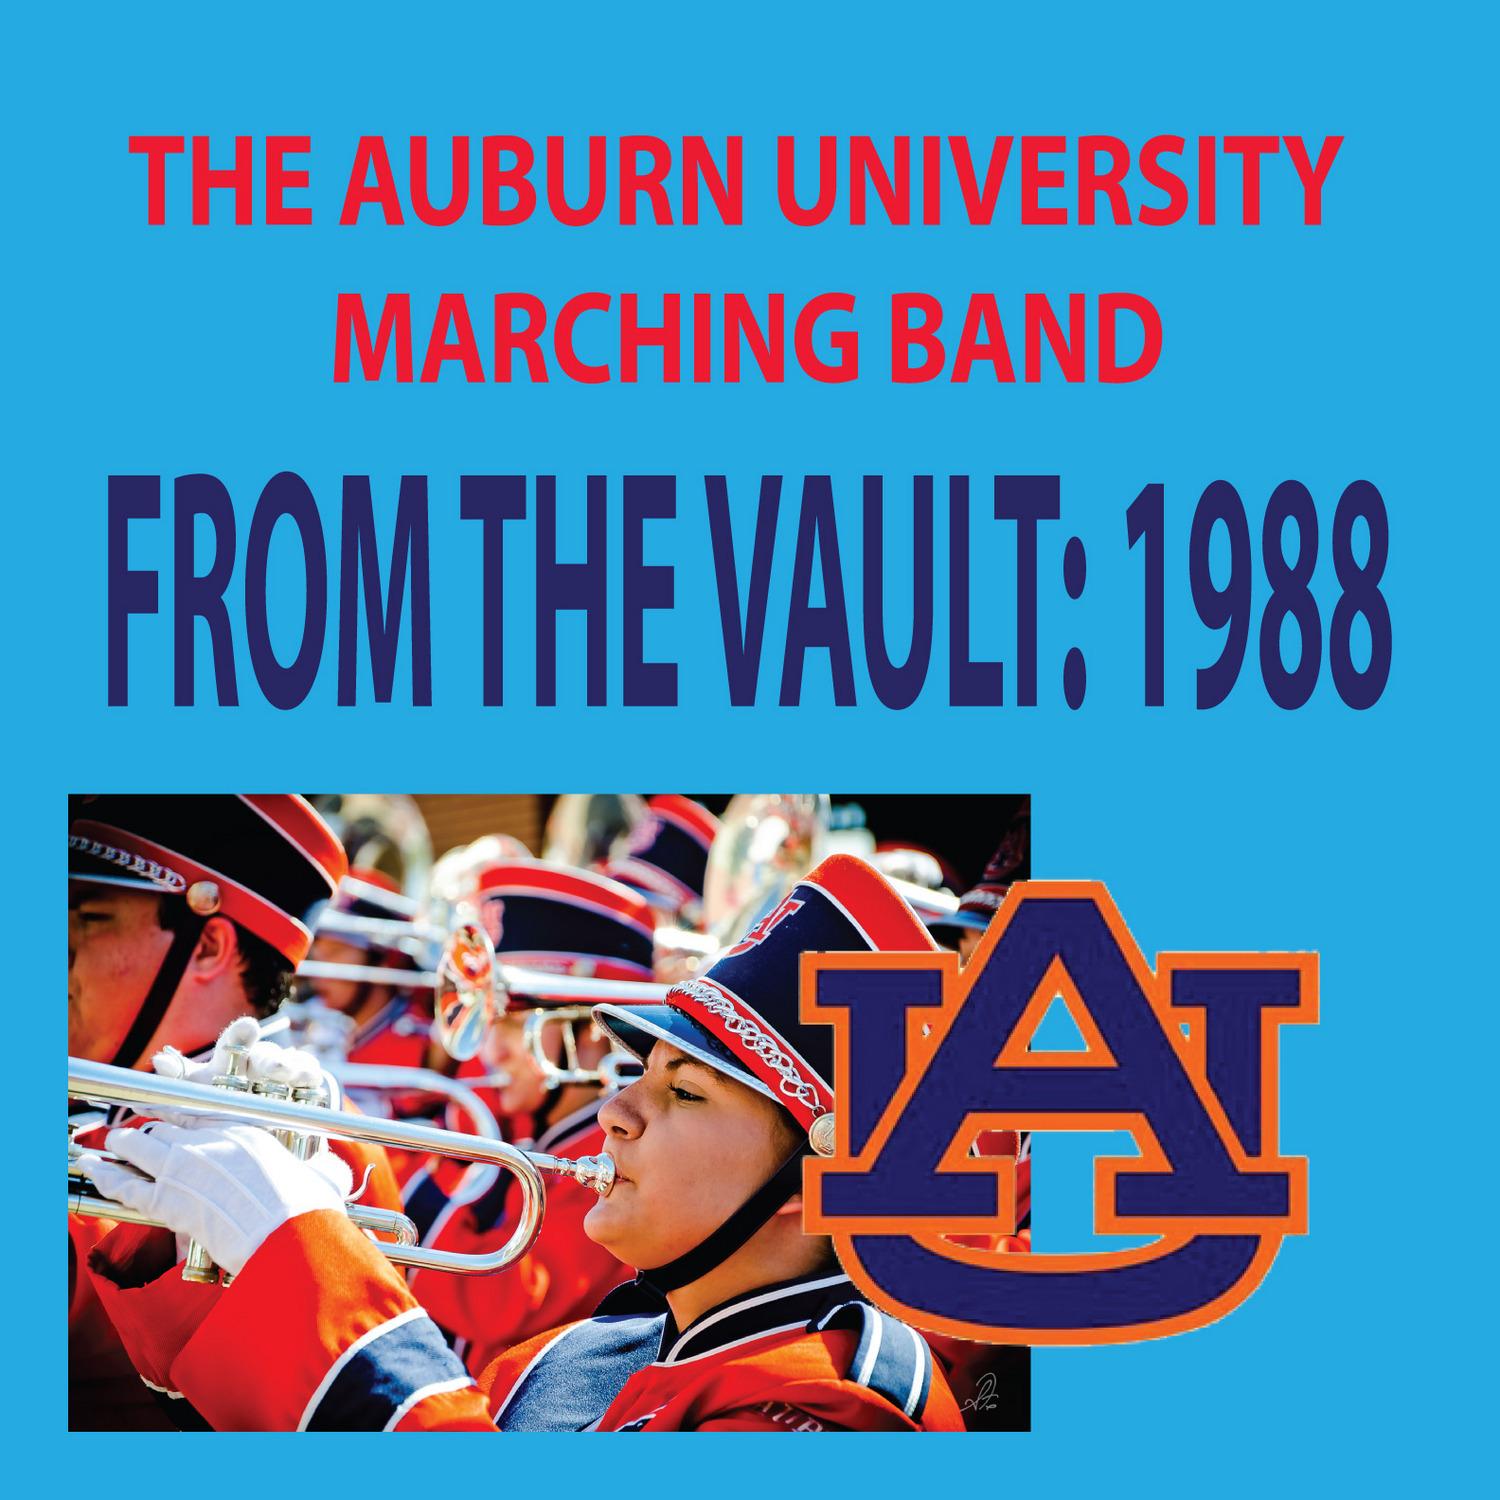 From the Vault - The Auburn University Marching Band 1988 Season